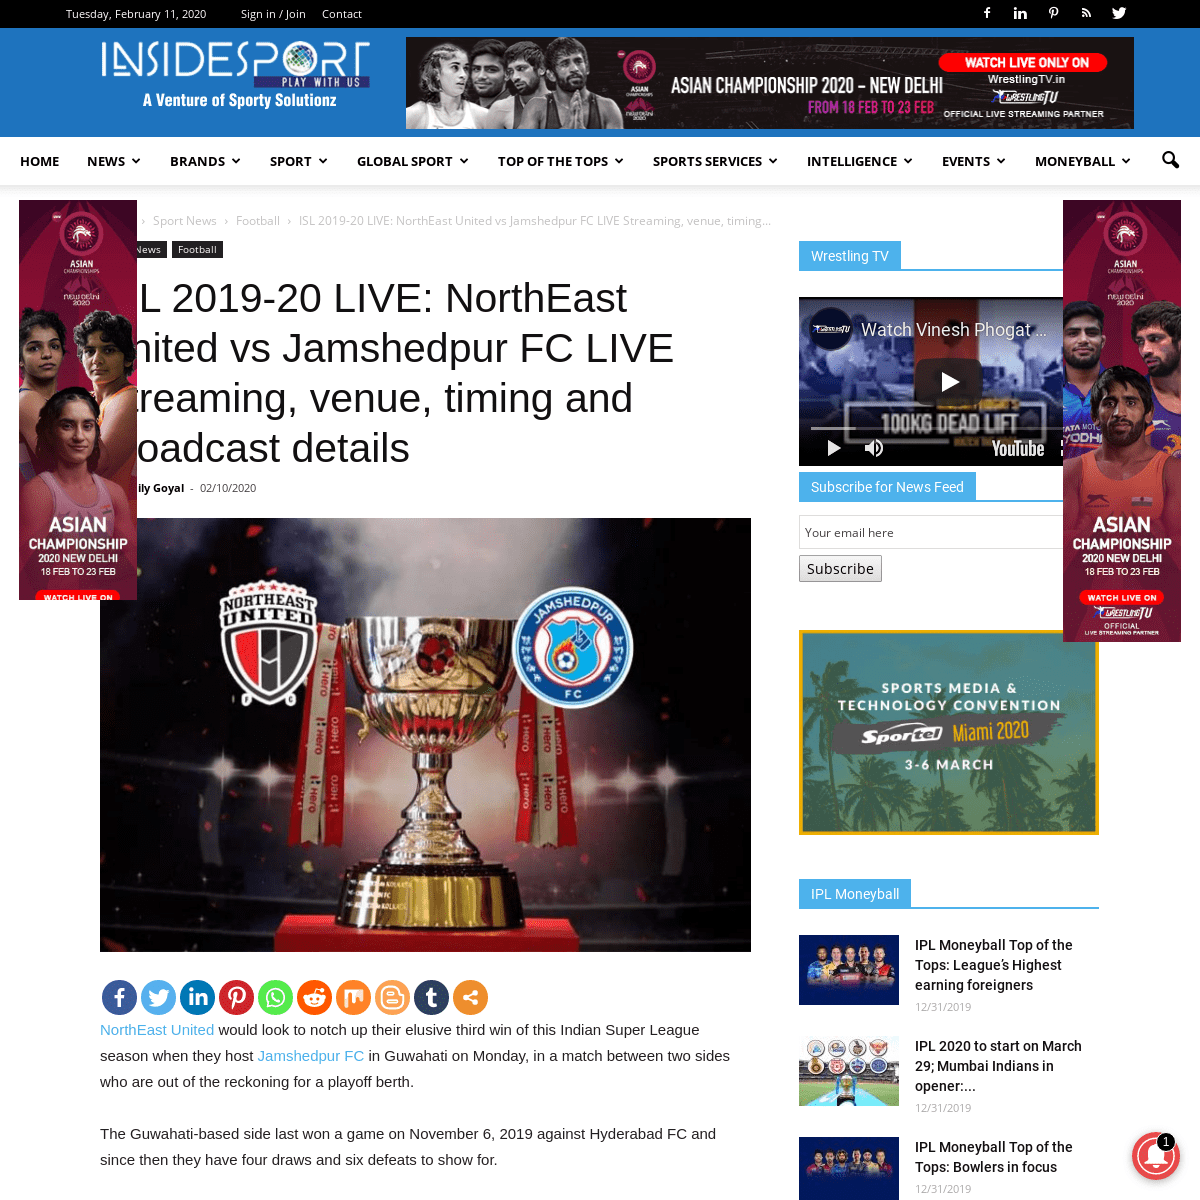 A complete backup of www.insidesport.co/isl-2019-20-live-northeast-united-vs-jamshedpur-fc-live-streaming-venue-timing-and-broad